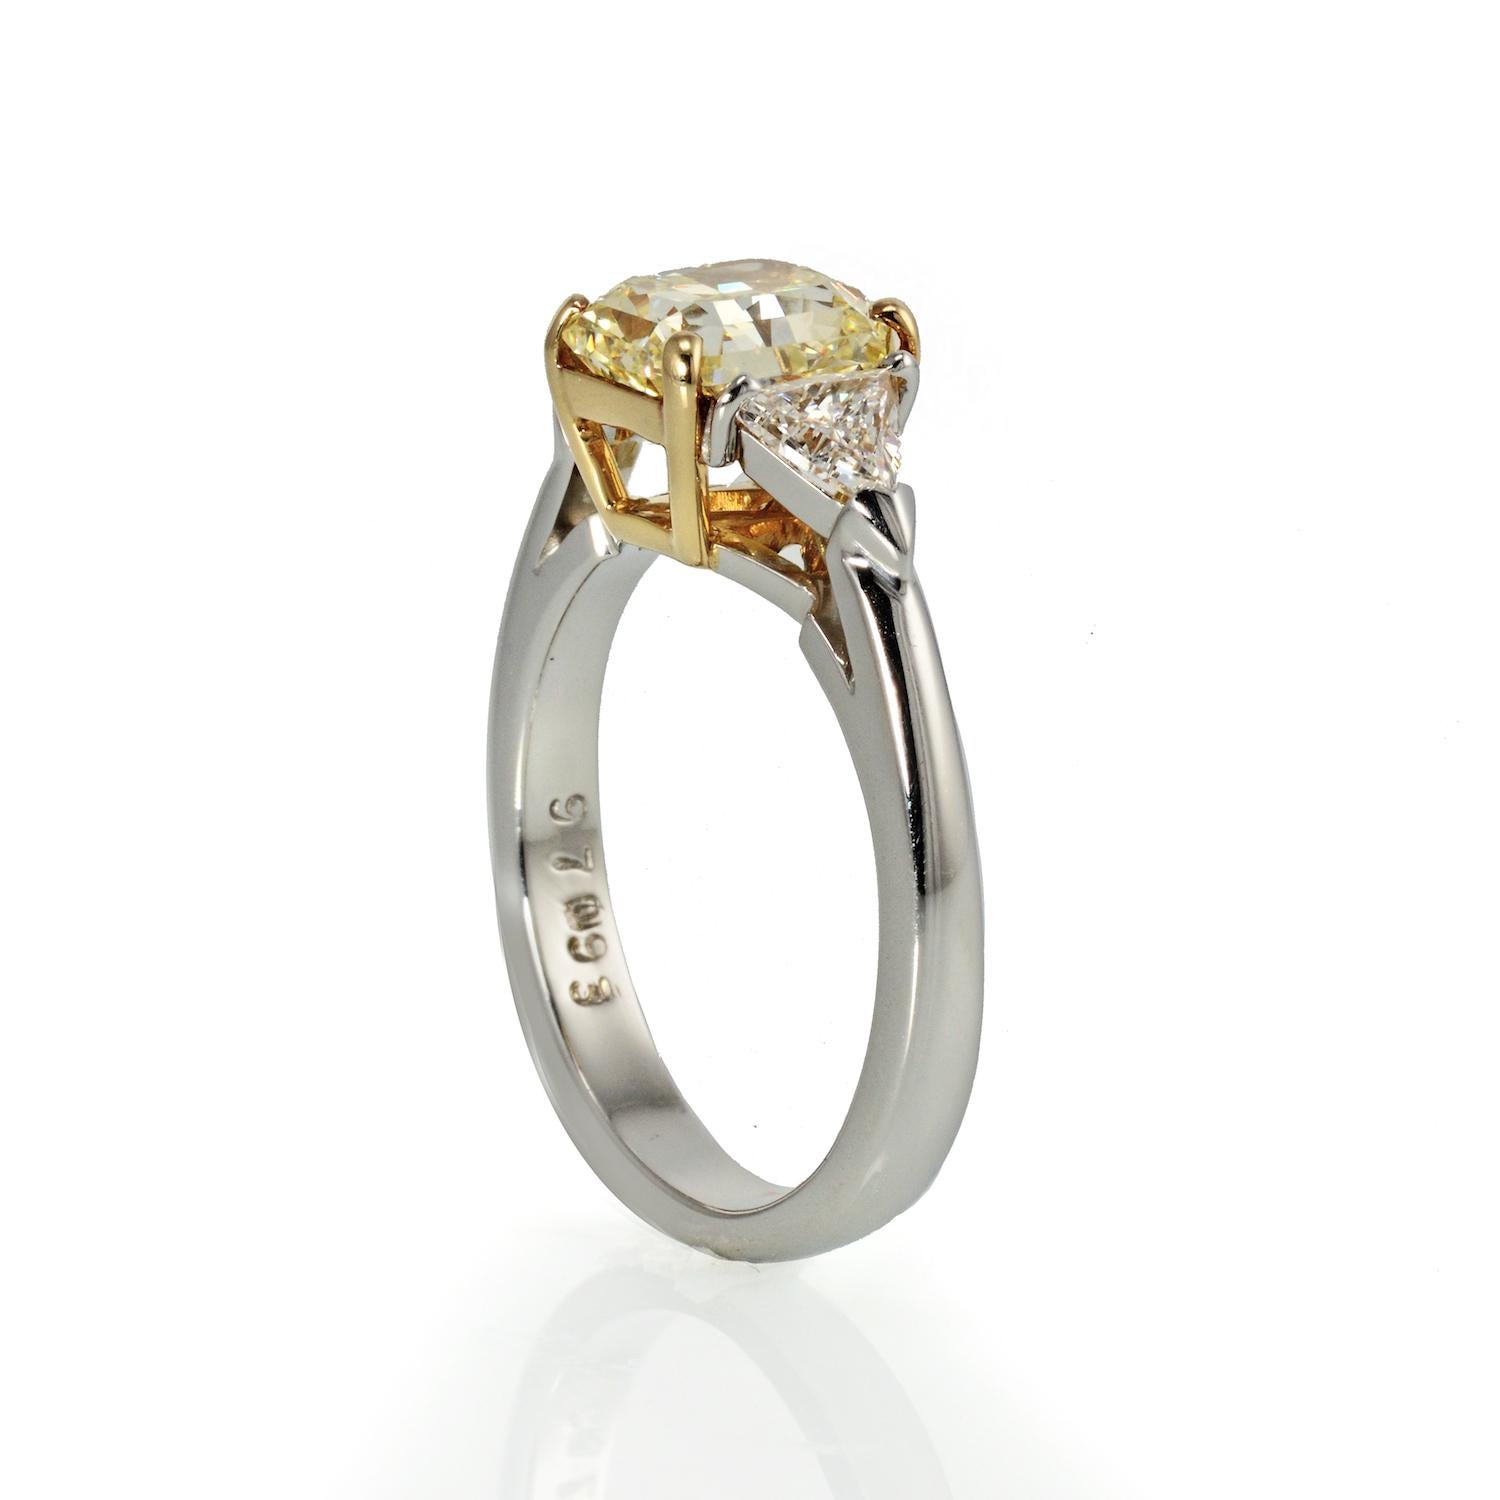 Ladies beautiful platinum and 18kt yellow gold three stone diamond ring featuring a 2.01 carat Radiant-cut Fancy Yellow and (VS1) in clarity. Two trilliant cut diamonds are set on the shoulders totaling 0.50ct total weight of (VS) in clarity and